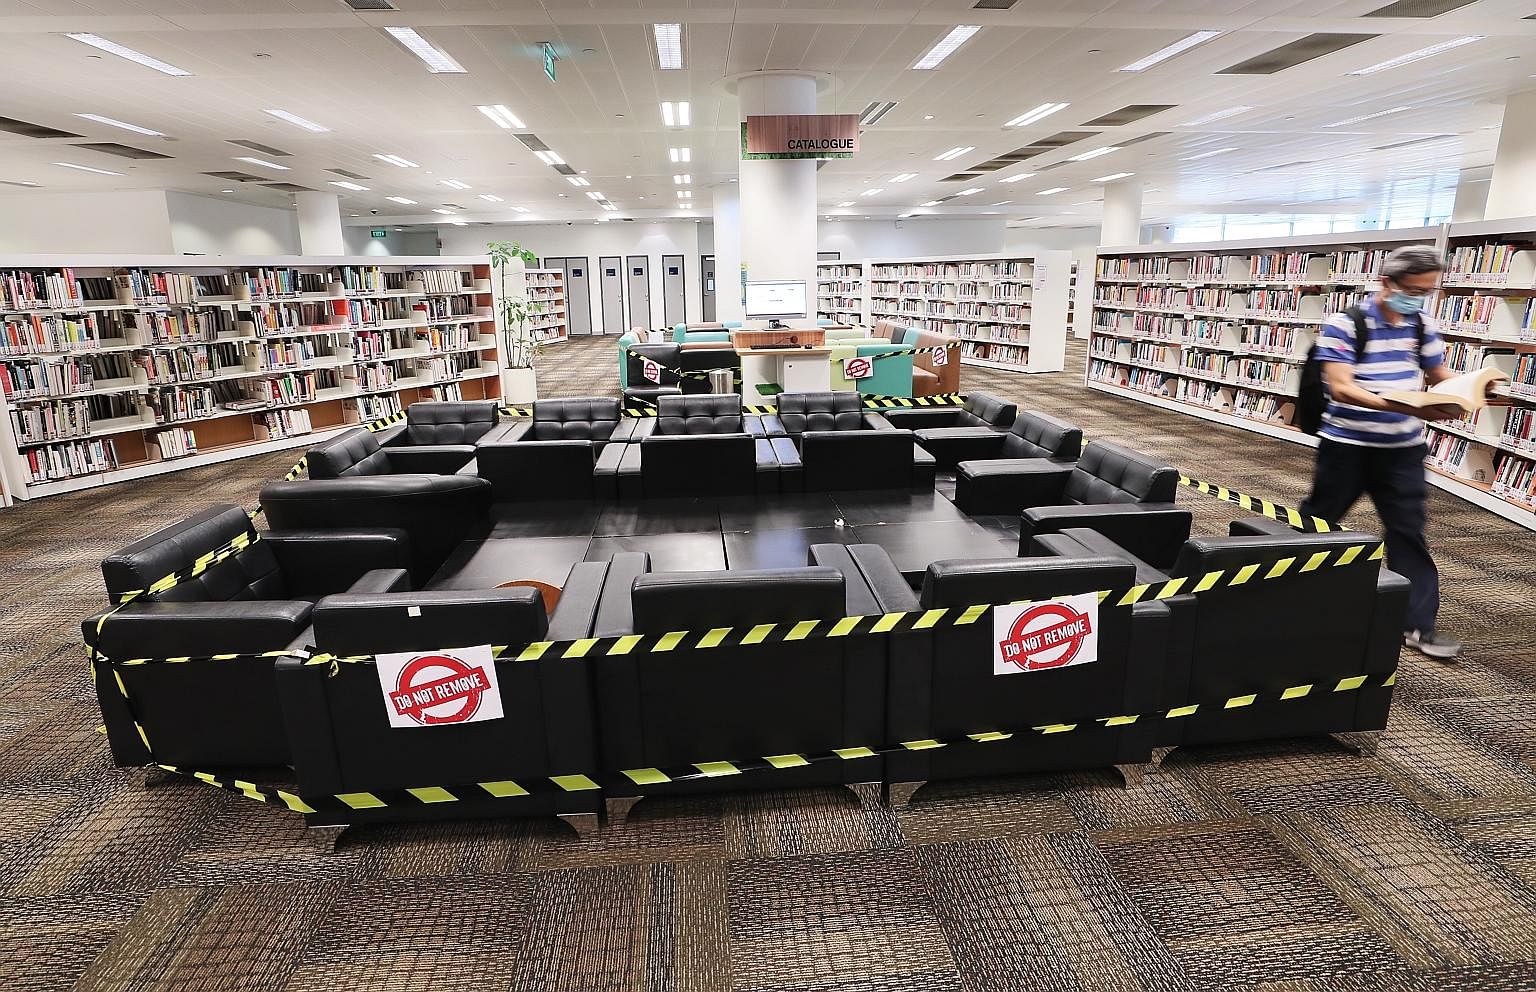 The Jurong Regional Library. During the circuit breaker, the National Library Board (NLB) seized the opportunity to experiment and try out new ideas, and drew much encouragement from public responses. It helped sharpen NLB's thinking for the Librarie